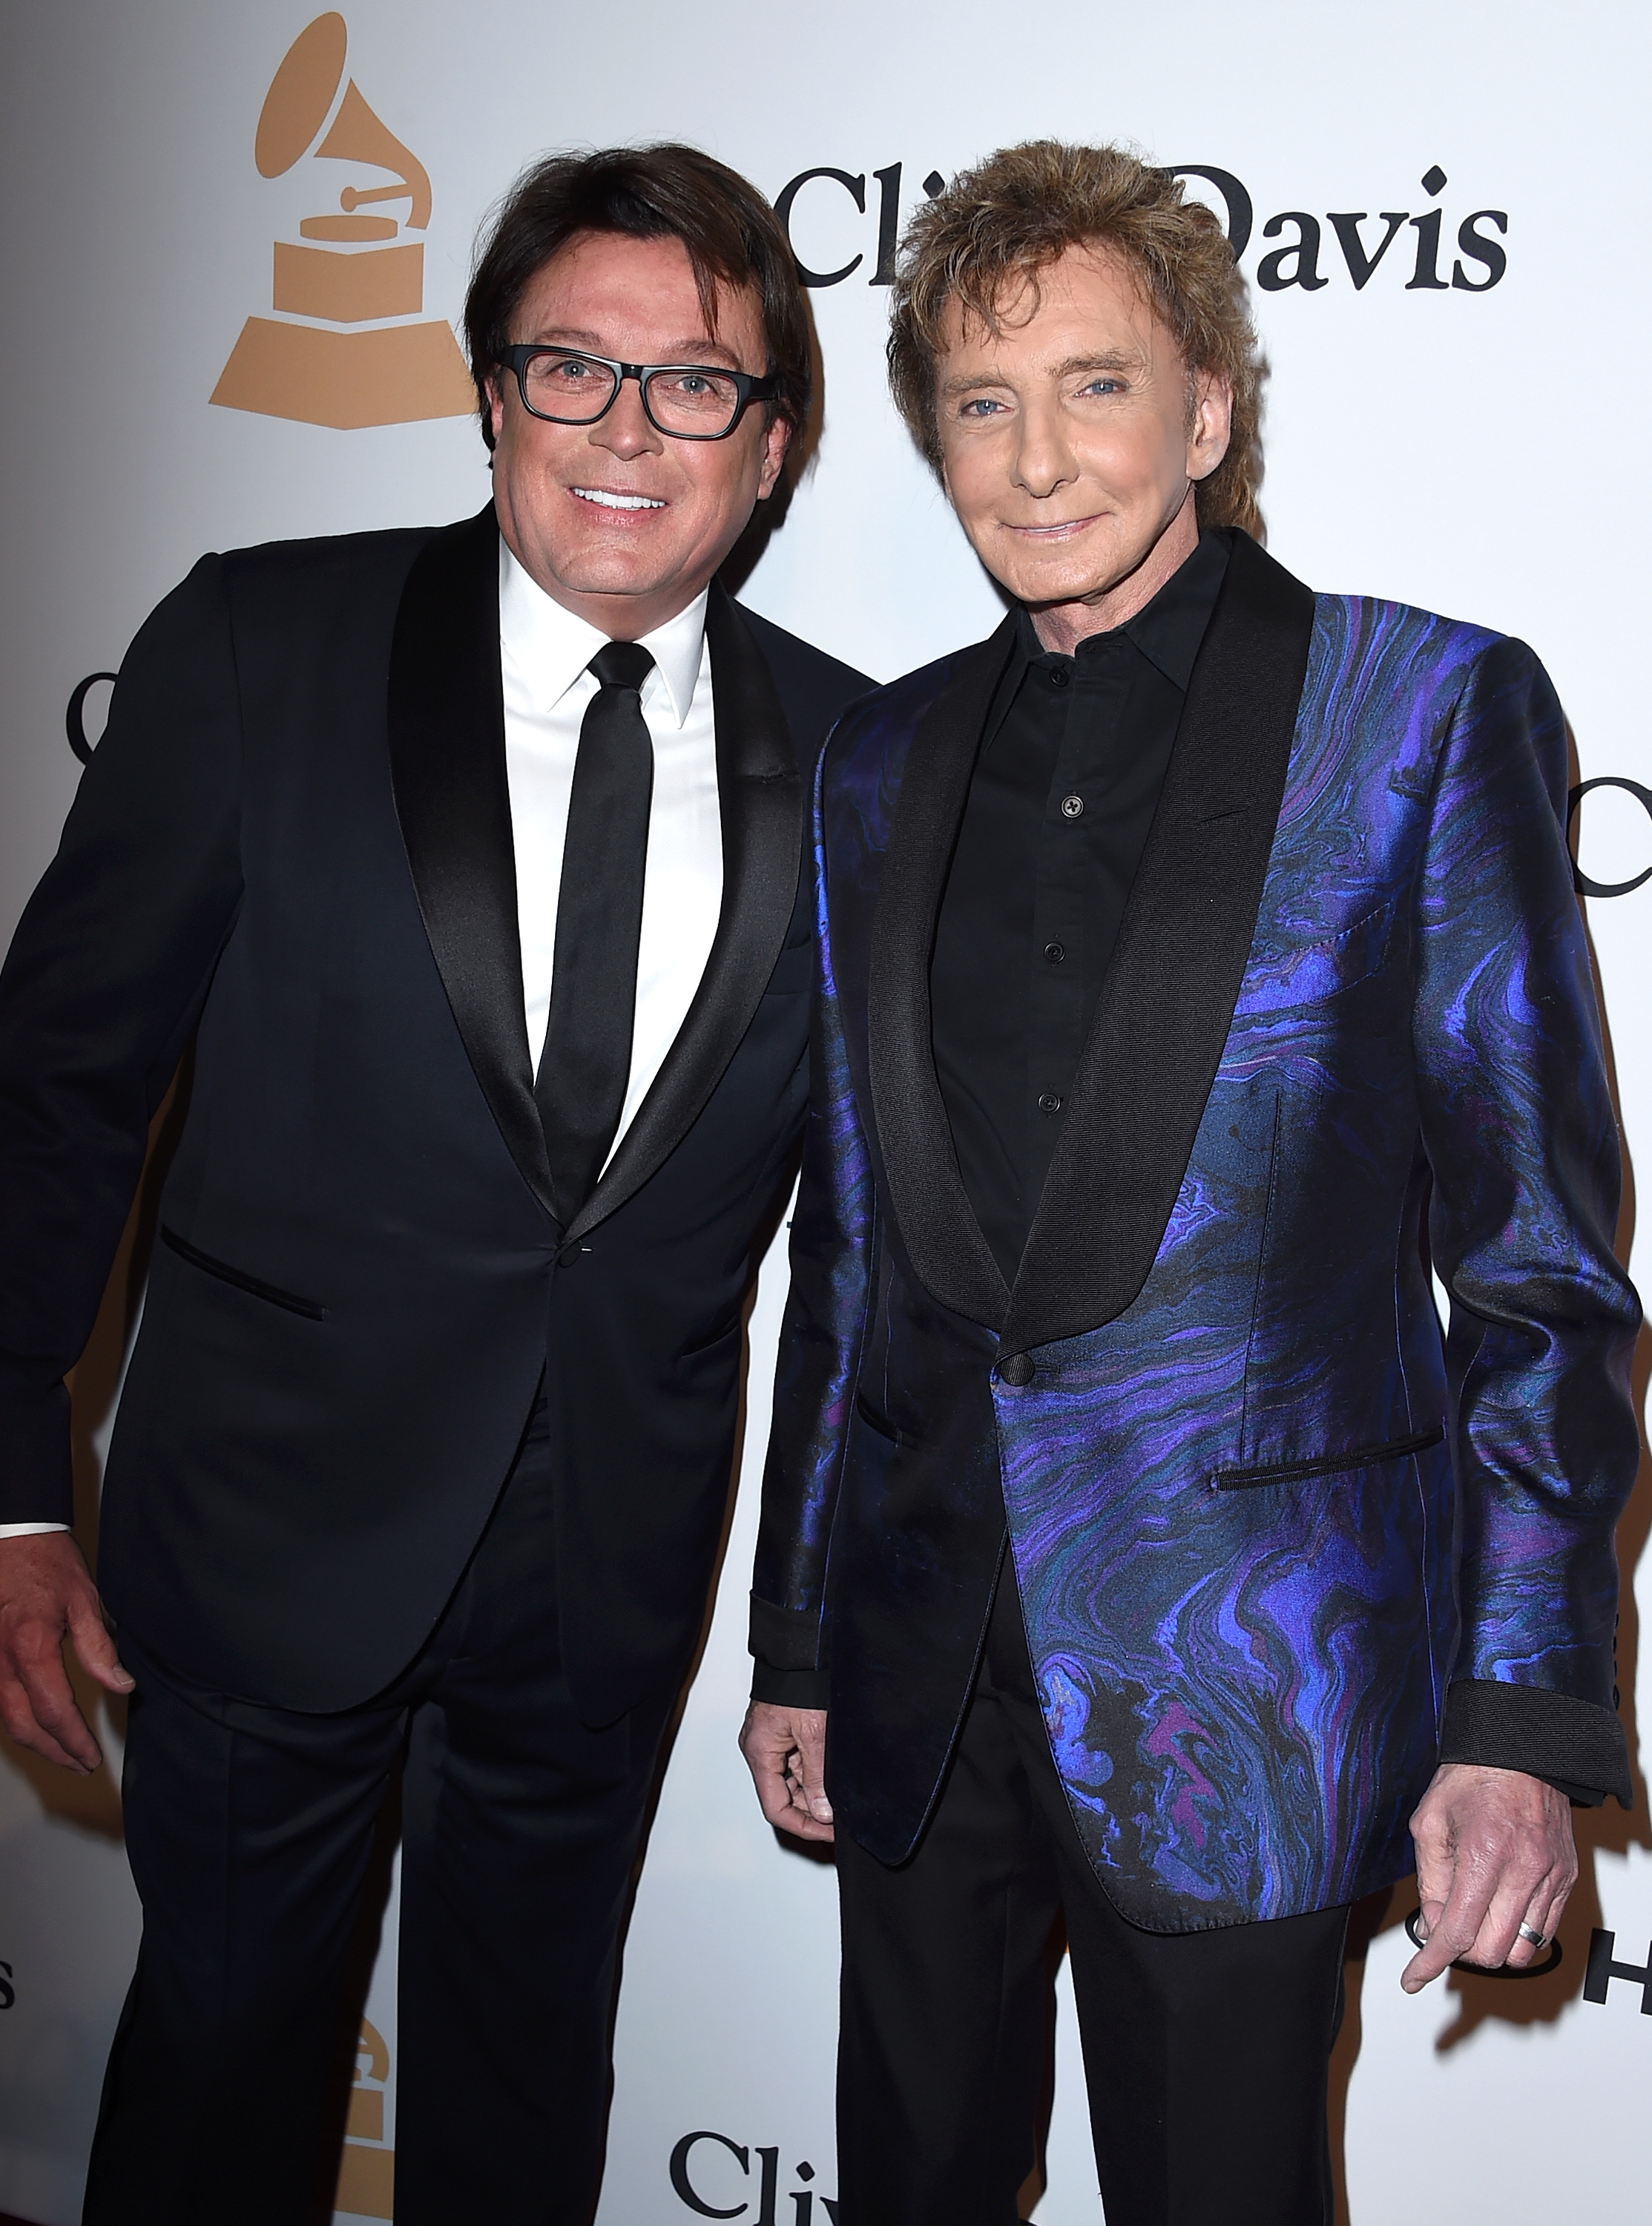 Garry Kief and Barry Manilow at the Pre-Grammy Gala in Beverly Hills, California on February 14, 2016 | Source: Getty Images